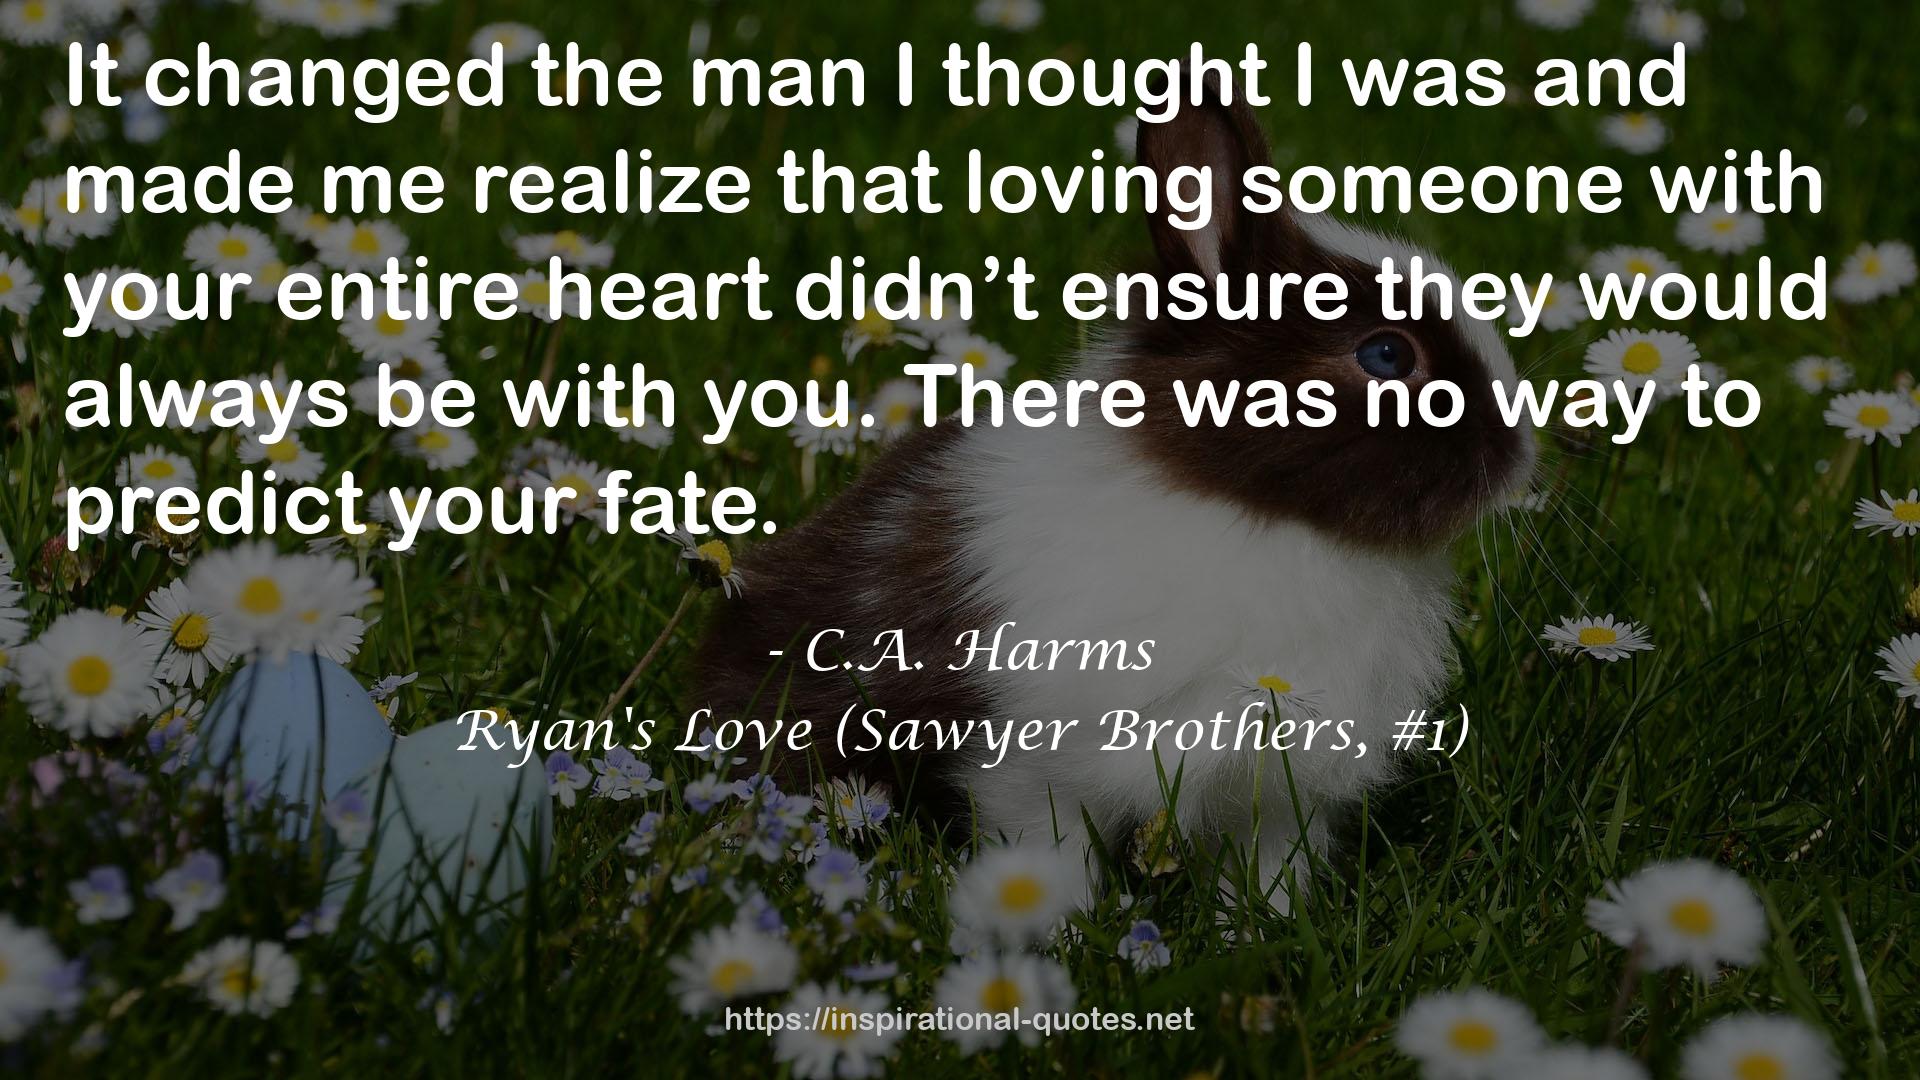 Ryan's Love (Sawyer Brothers, #1) QUOTES